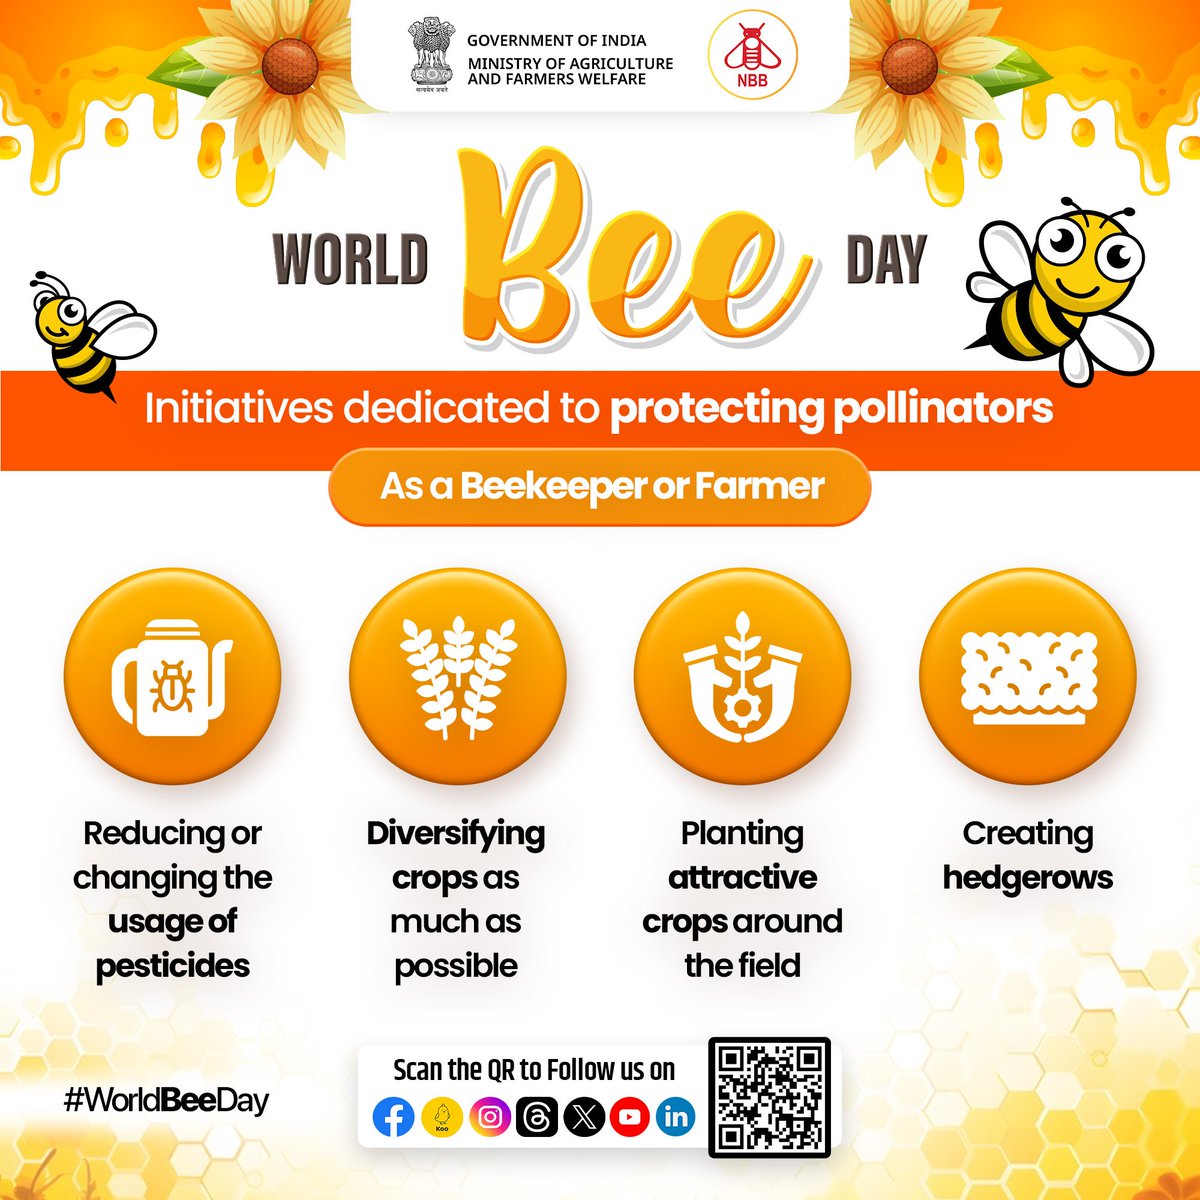 #WorldBeeDay is celebrated to raise awareness of the vital role bees play in pollinating plants, supporting biodiversity and ensuring food security for humans.

#agrigoi #BeeEngaged #pollinators #SaveTheBees